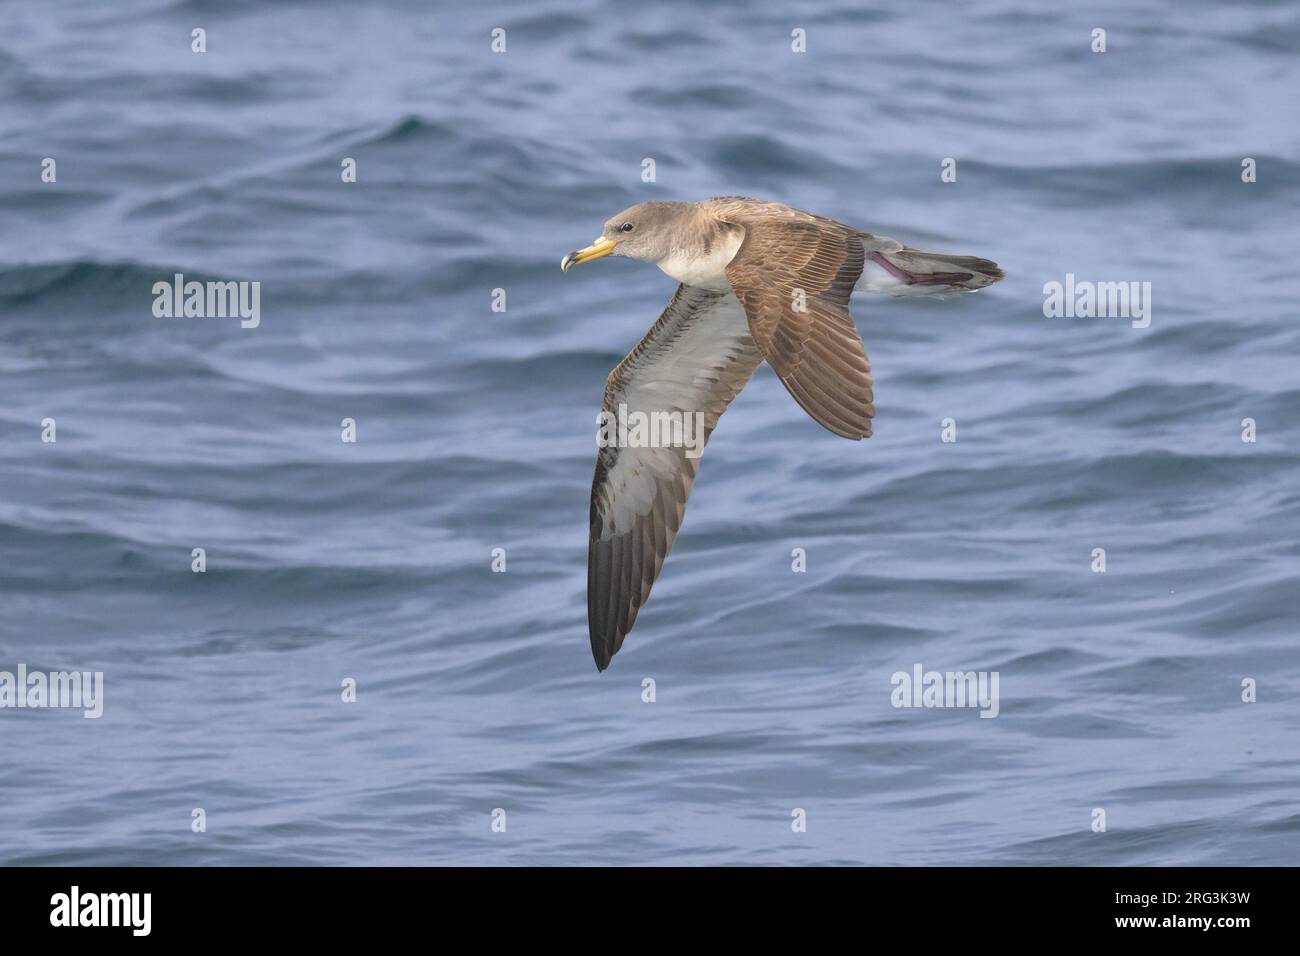 Cory's shearwater (Calonectris borealis) flying, wit the sea as background. Stock Photo